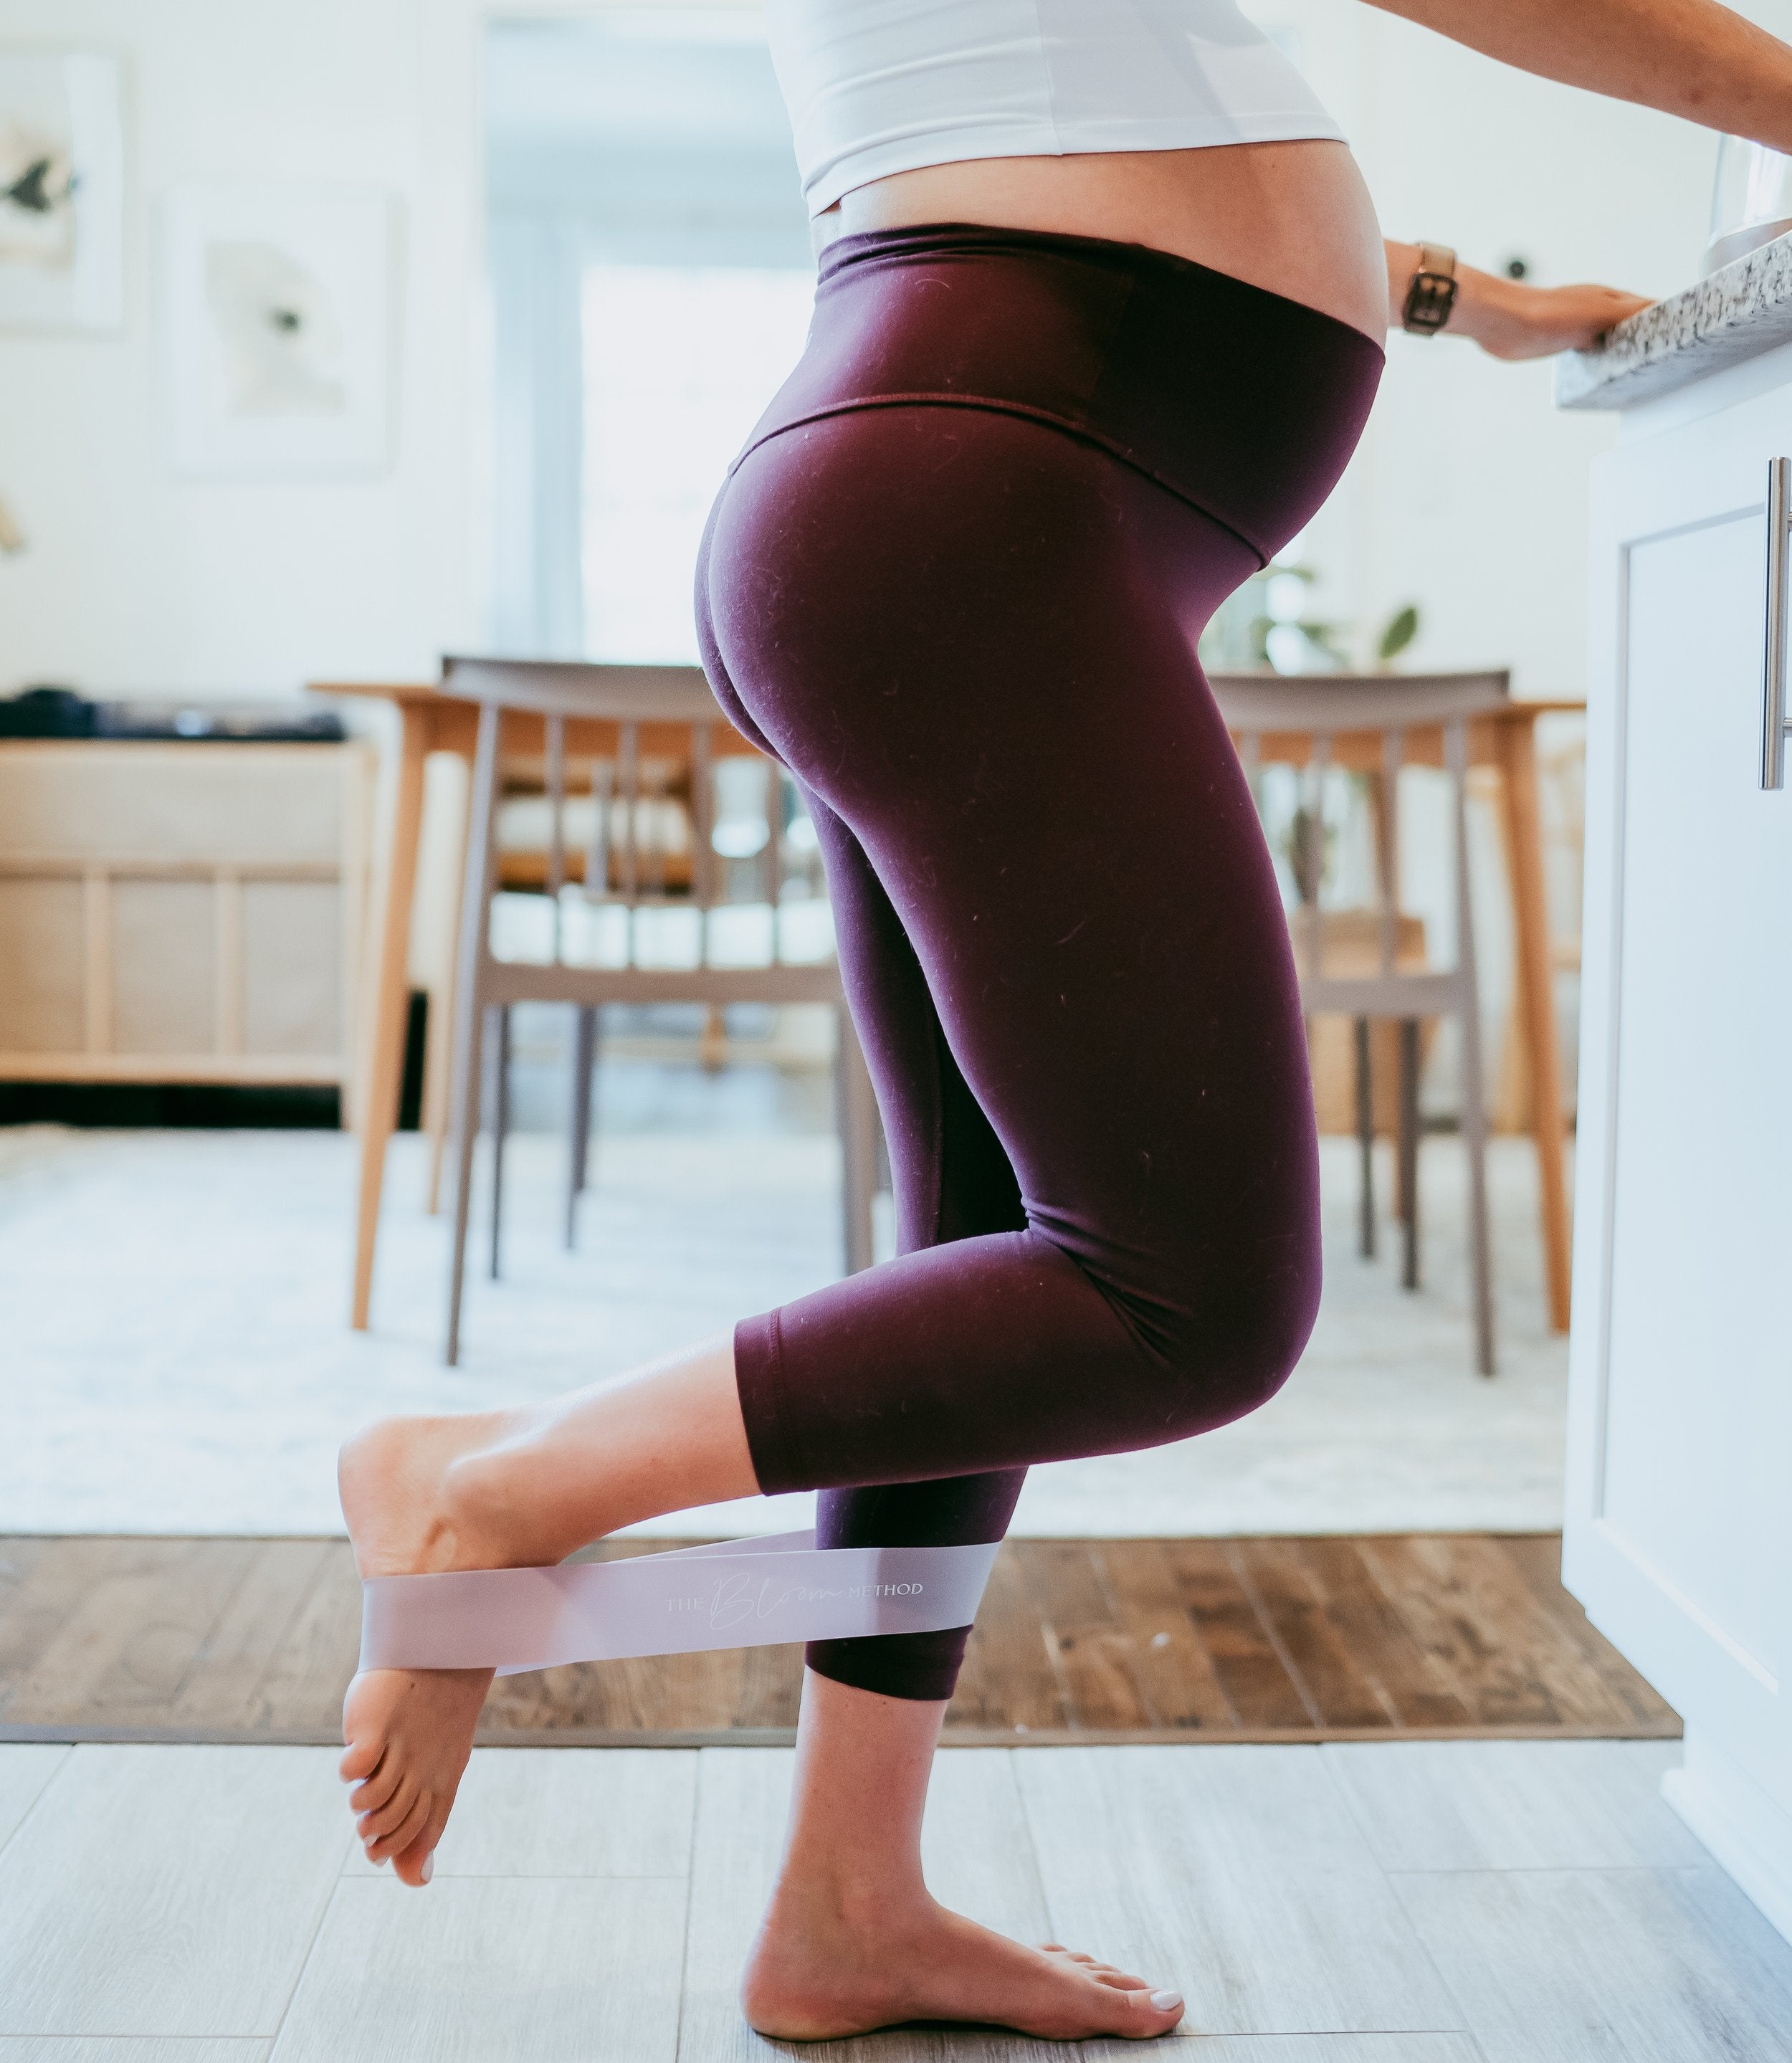 Glute Exercises for Pregnancy and Postpartum – The Bloom Method